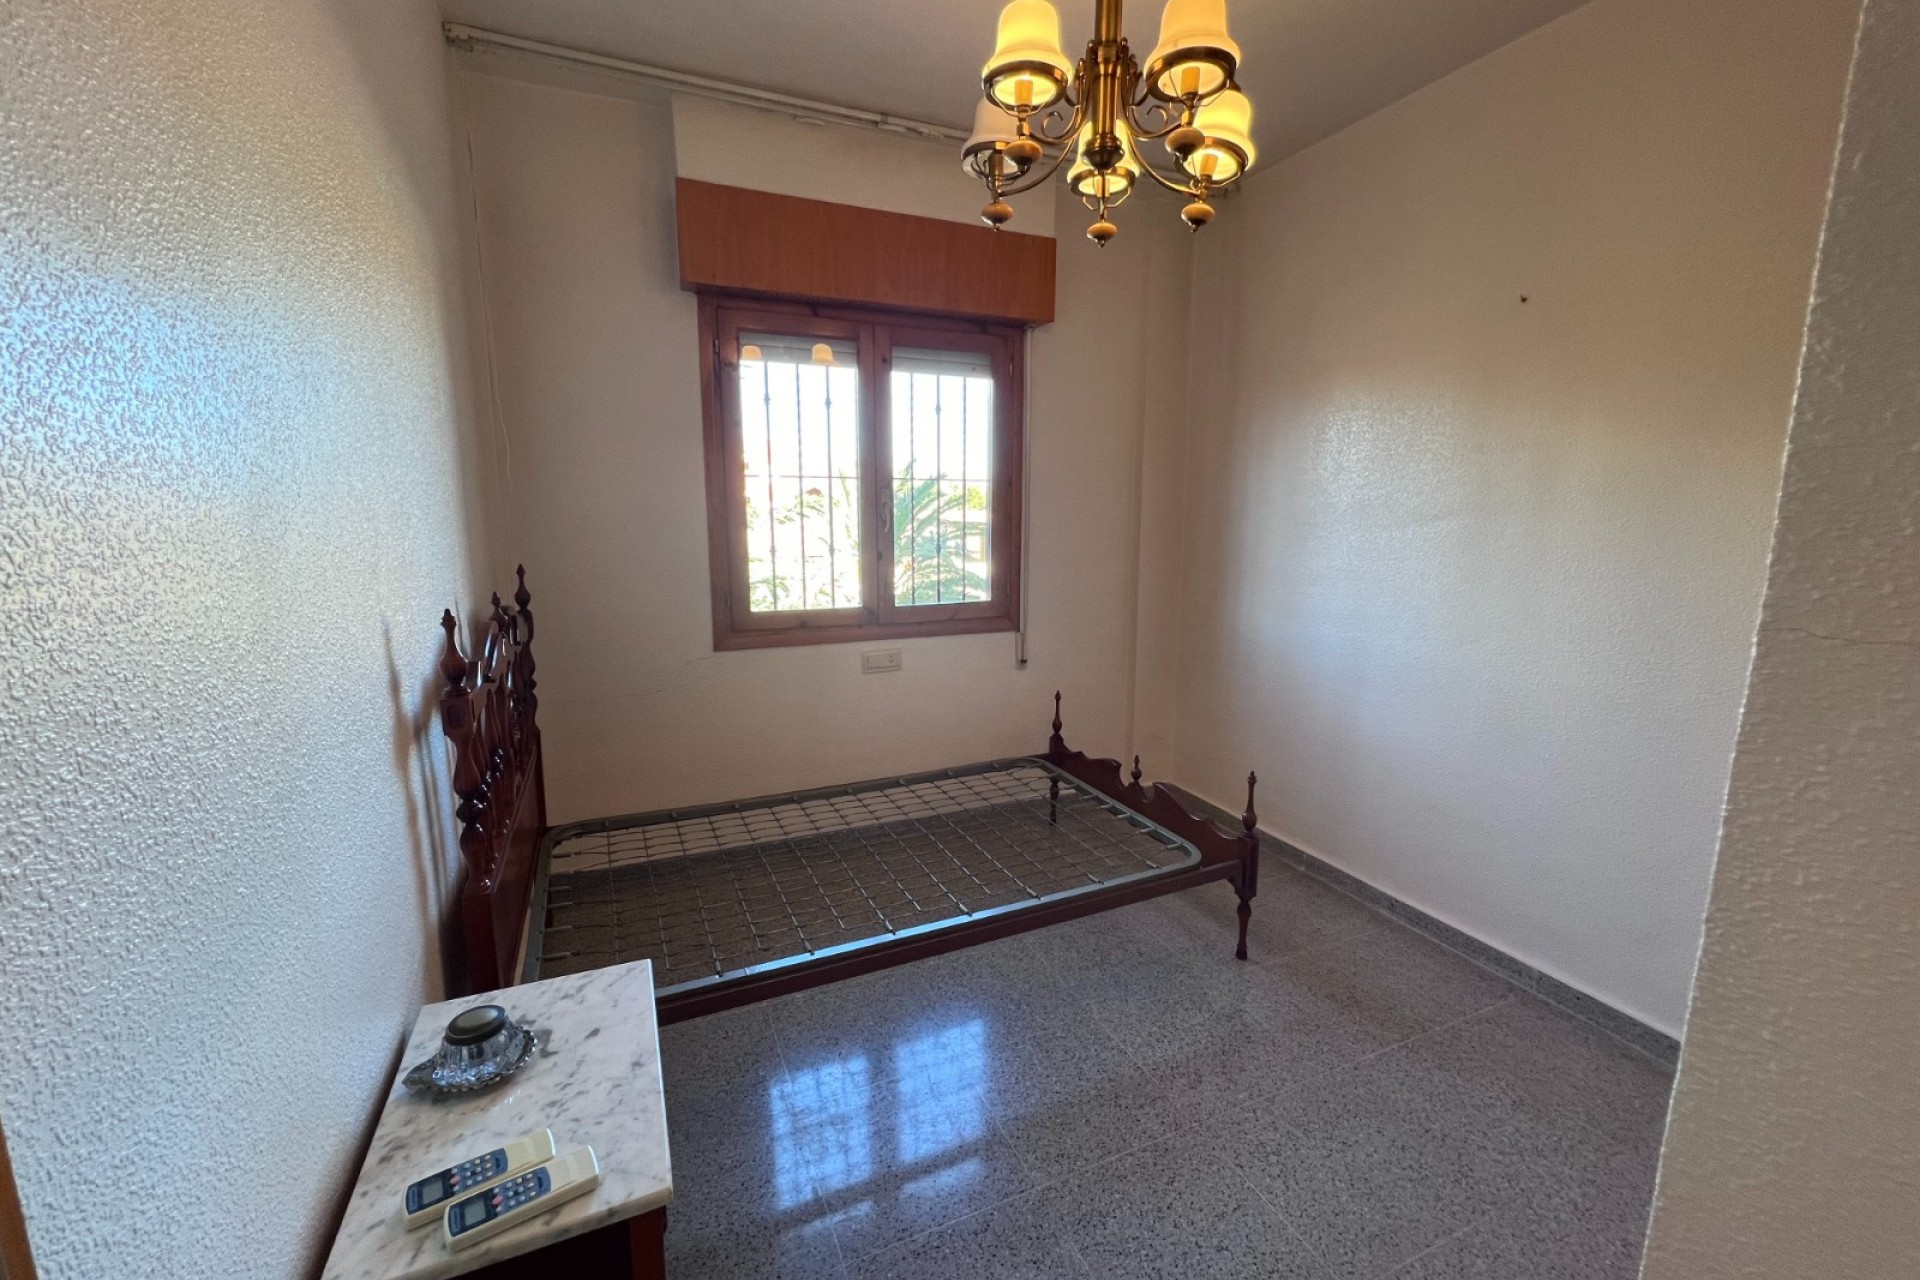 Resale - Town House -
Jacarilla - Inland